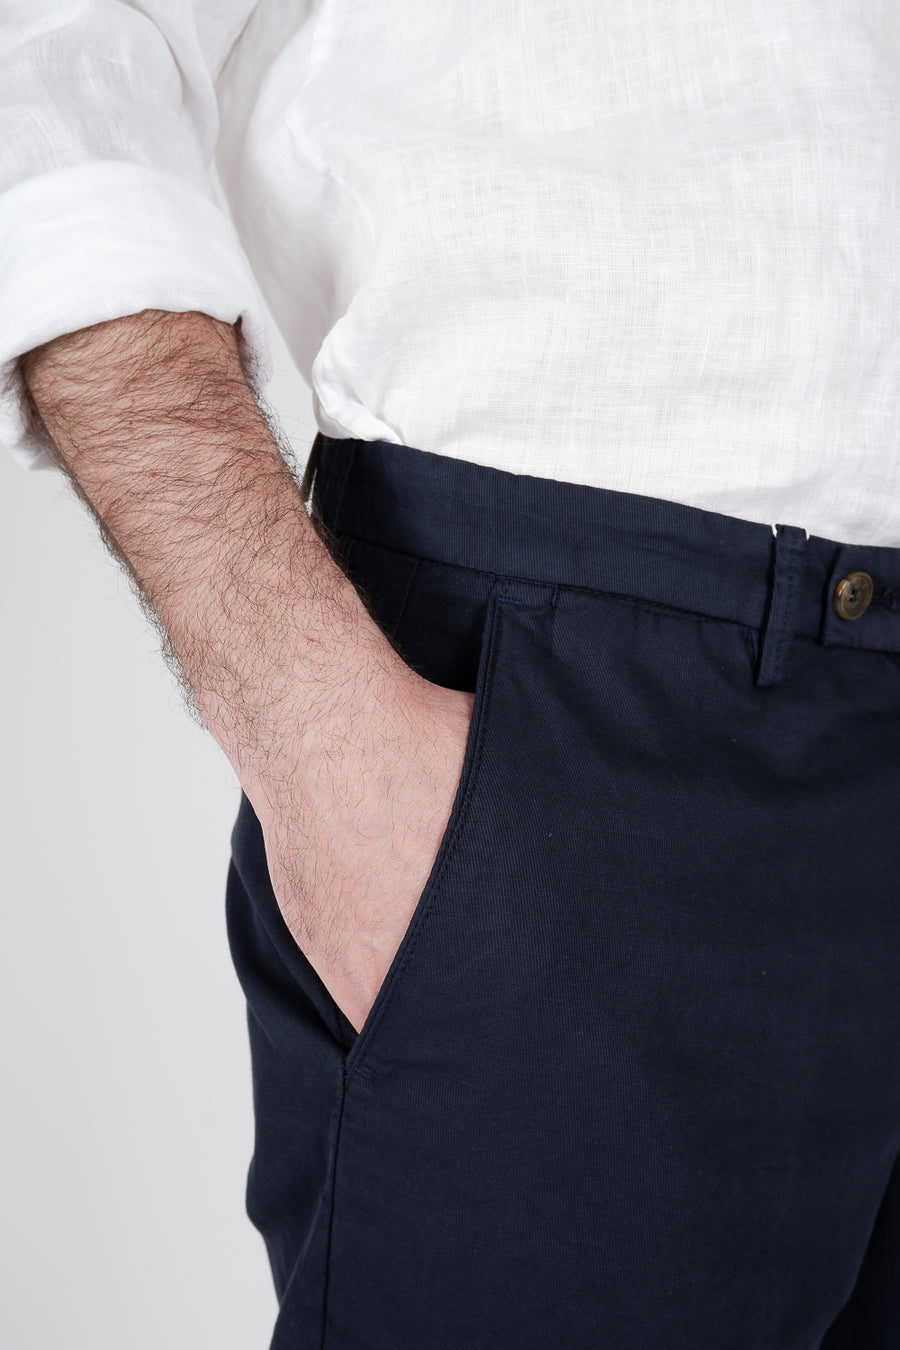 Buy the Briglia Italian Cotton Chino Shorts in Navy at Intro. Spend £100 for free UK delivery. Official stockists. We ship worldwide.